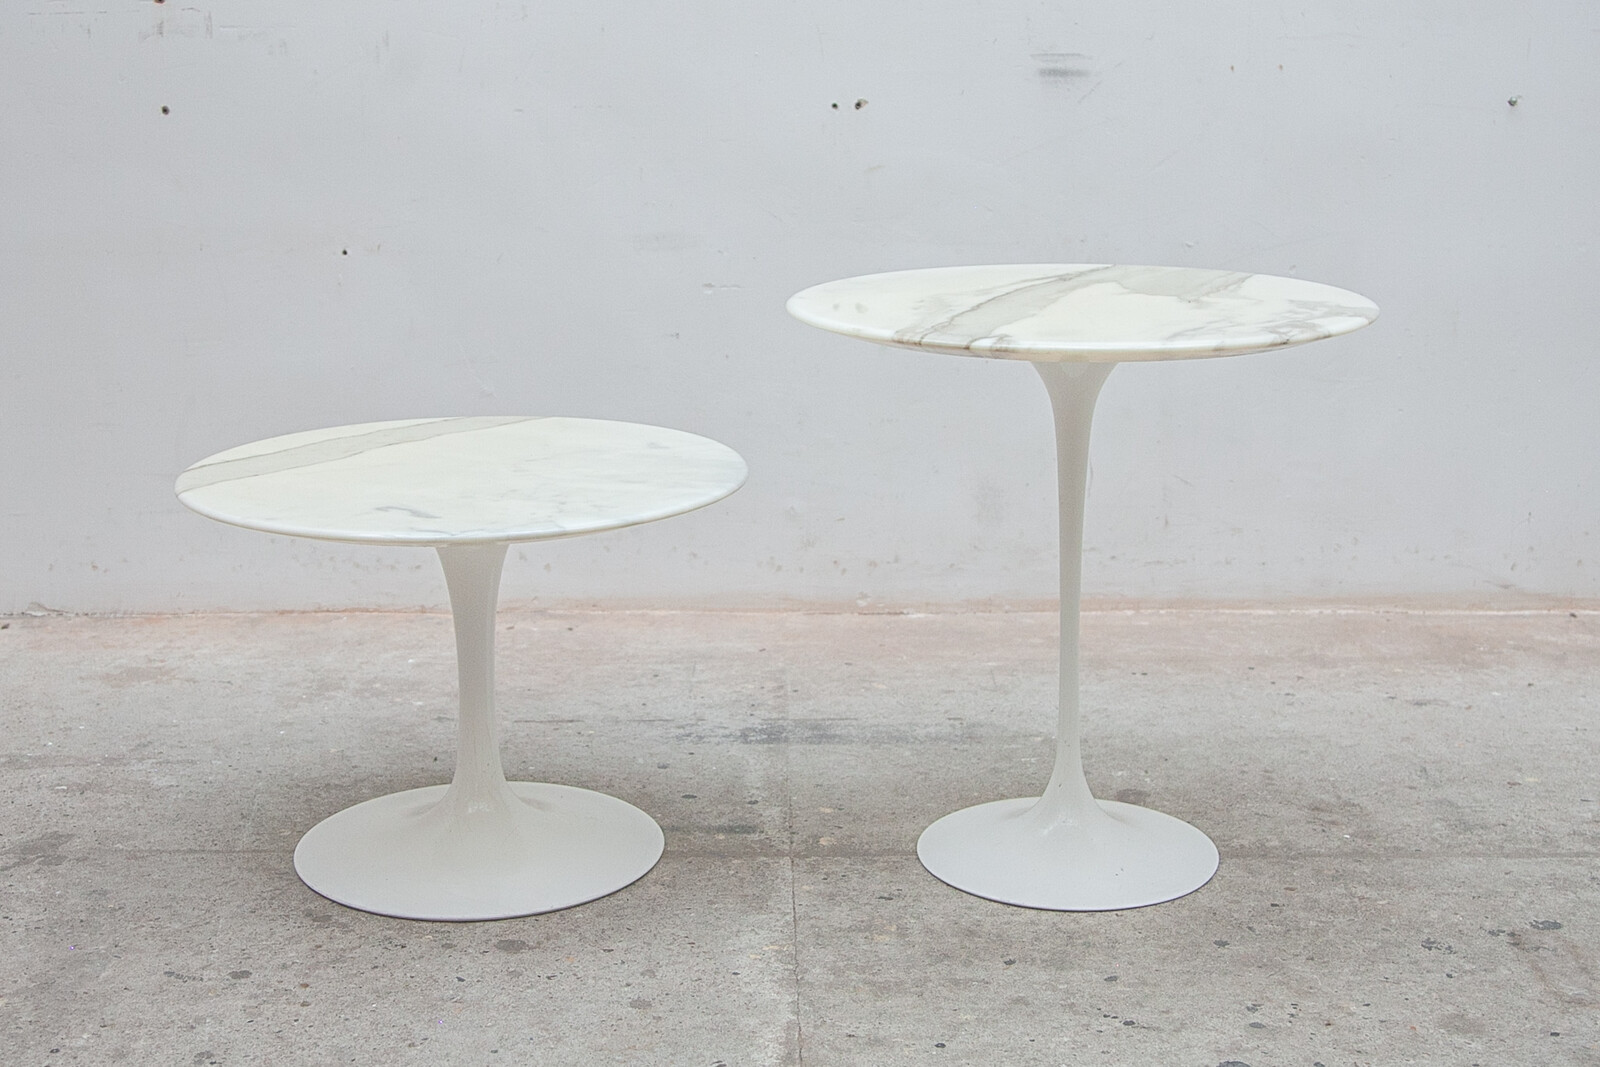 Set of Two Eero Saarinen Sofa Side Tables in White Marble for Knoll, Labeled